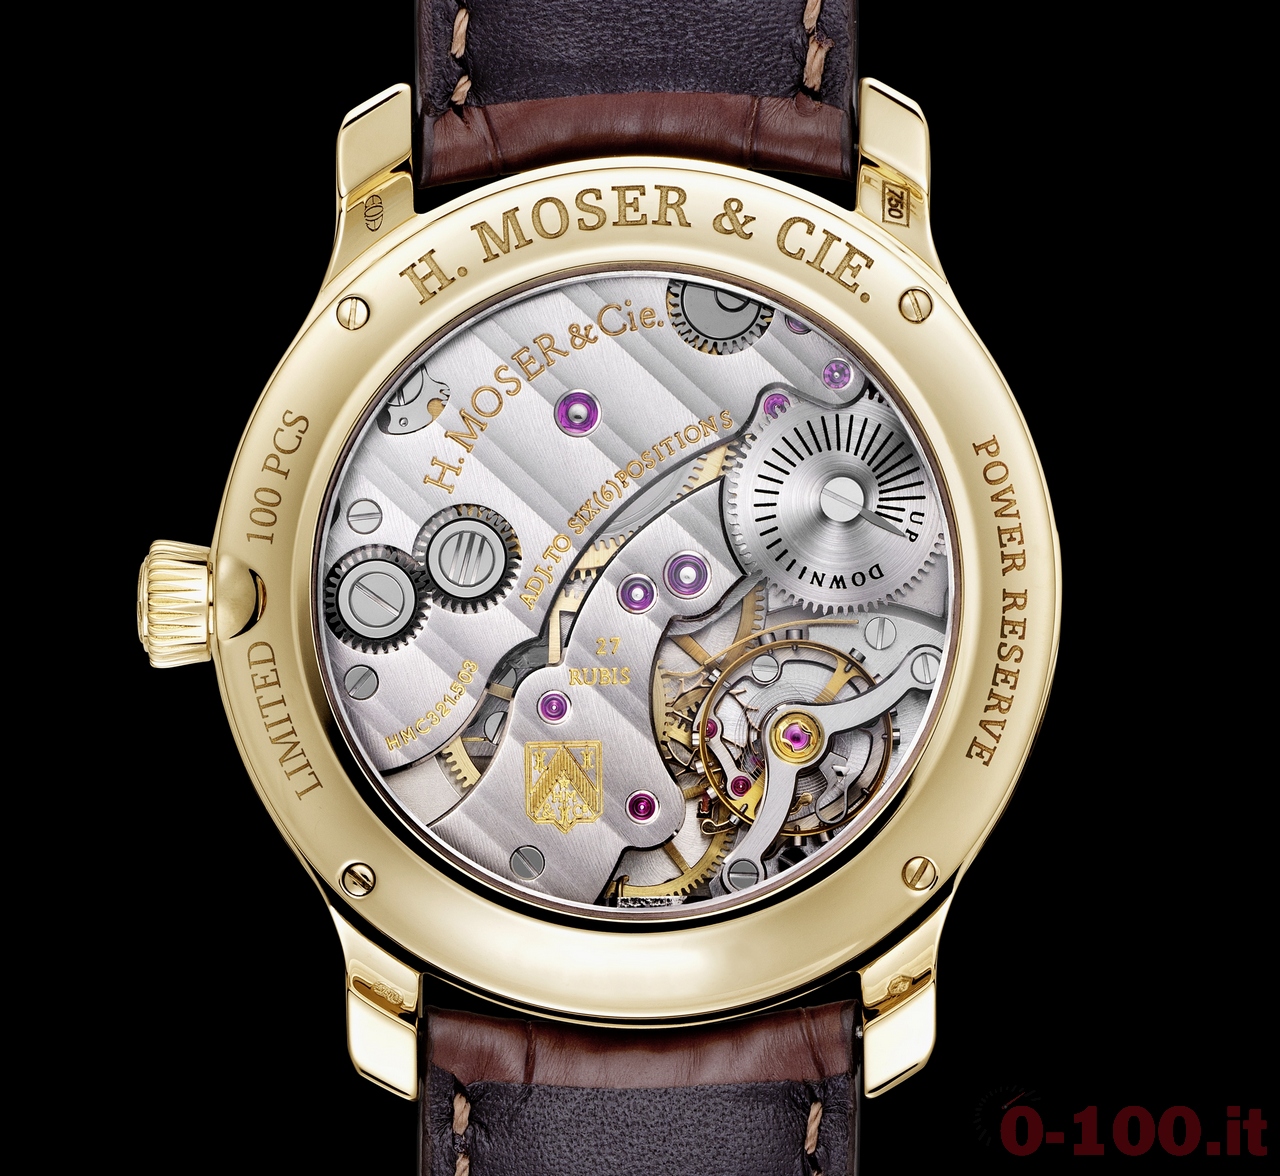 h-moser-cie-endeavour-small-seconds-bryan-ferry-limited-edition-ref-1321-0116_0-1005